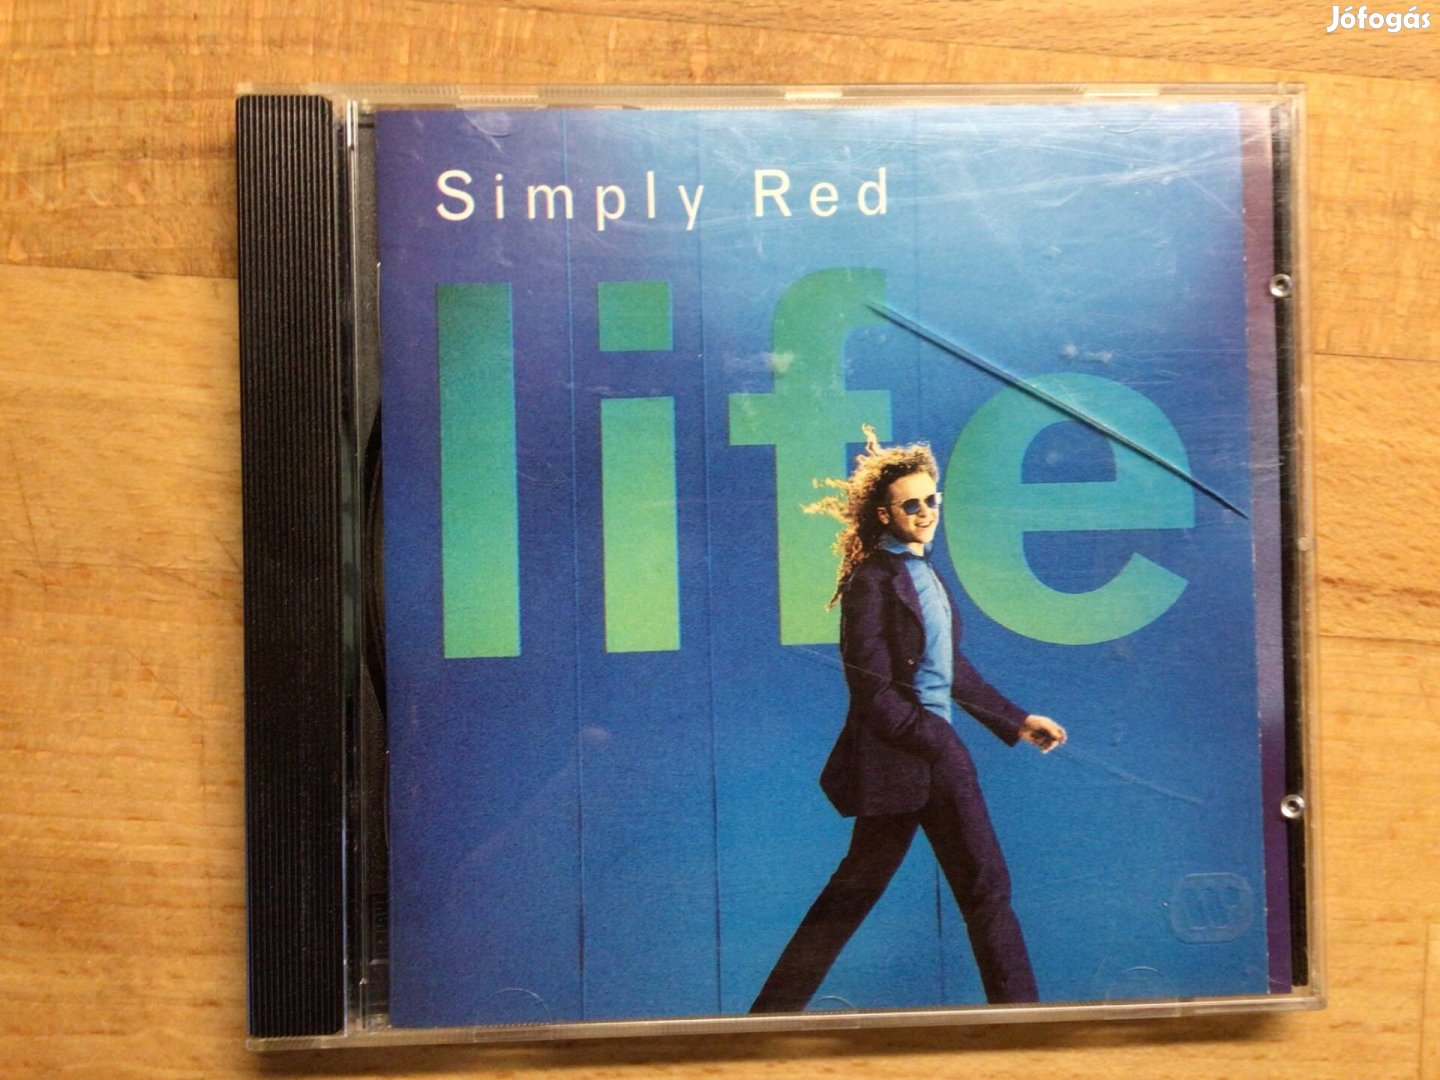 Simple Red- Life, cd lemez